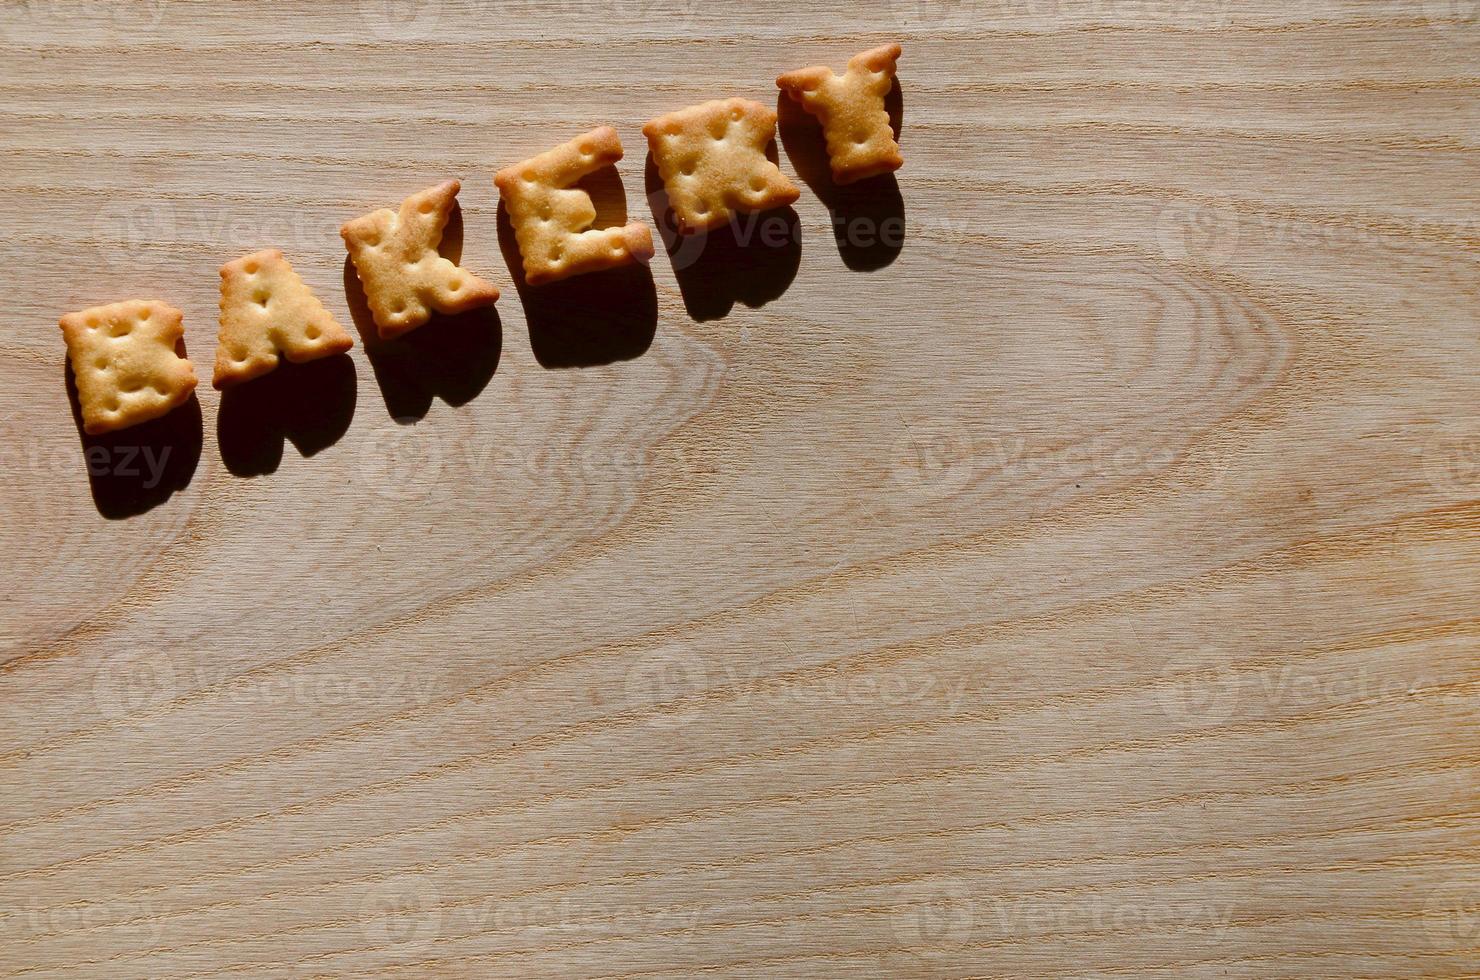 Bakery. Edible letters photo